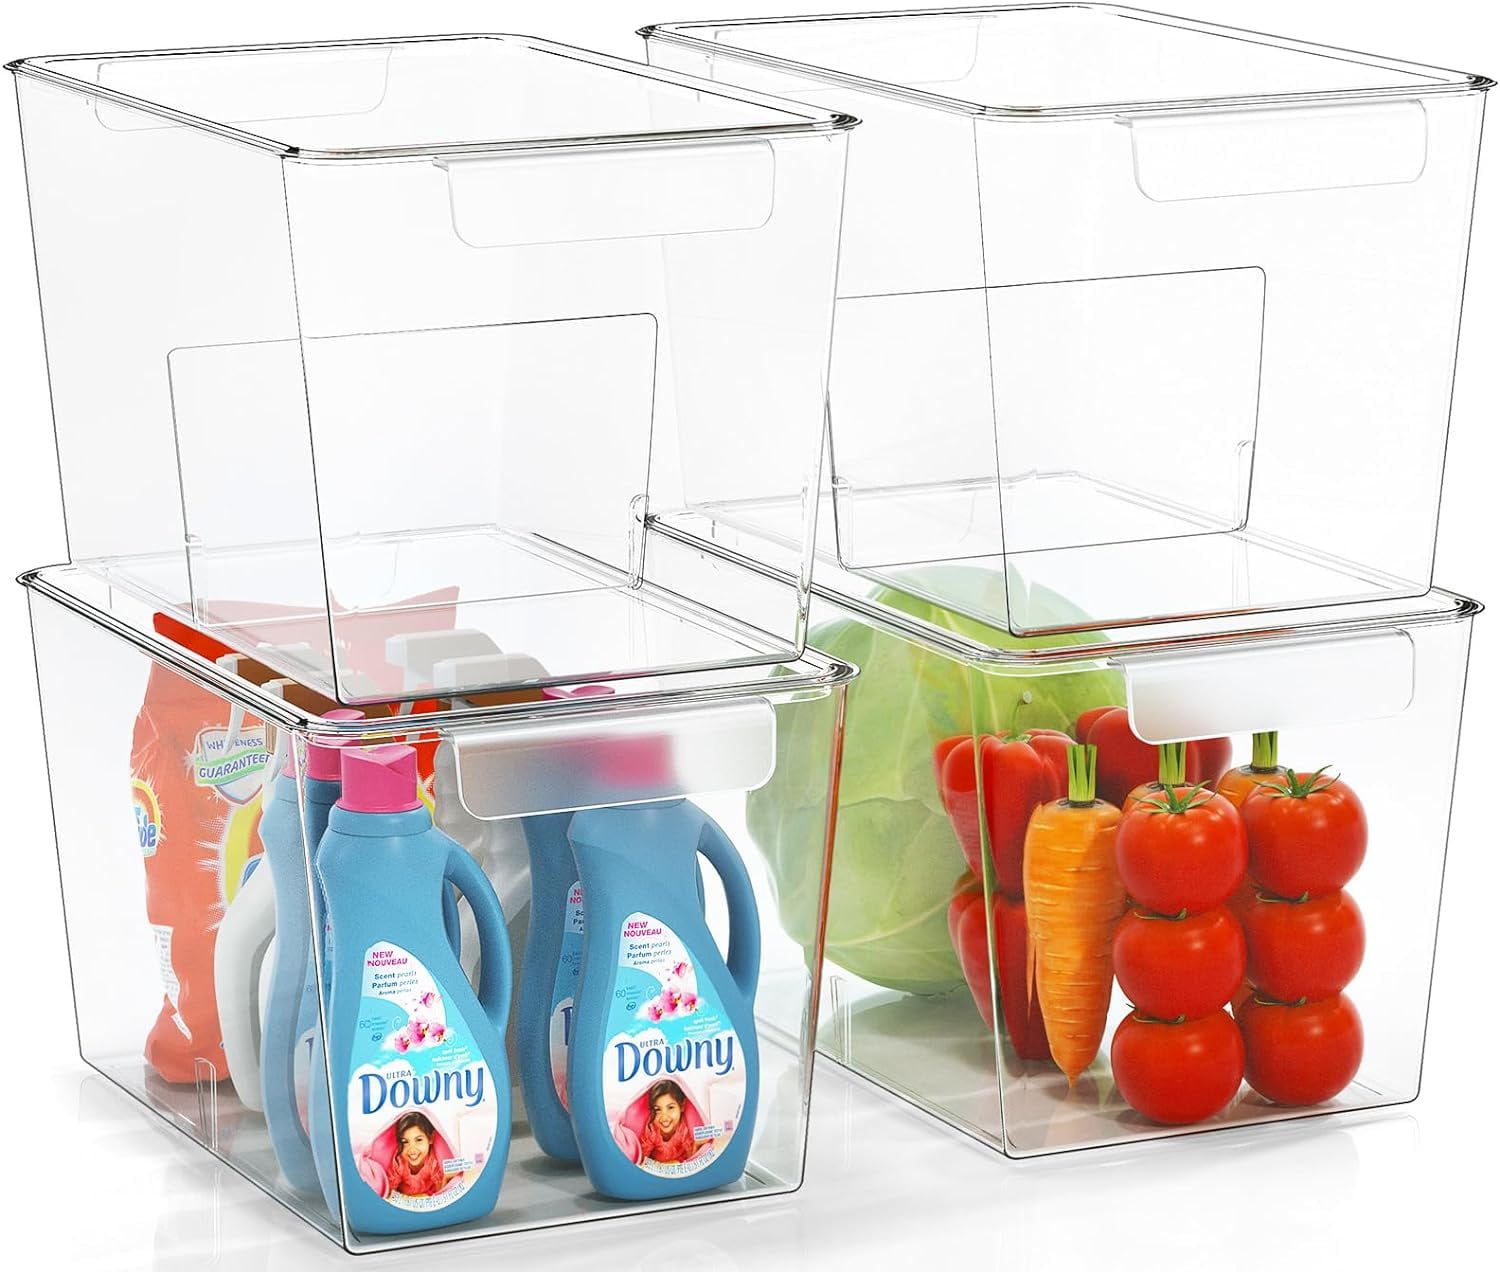 Dyxoo Ice Cube Bin Bucket Trays - Ice Holder, Container, Storage for Freezer, Refrigerator with Scoop, Lids